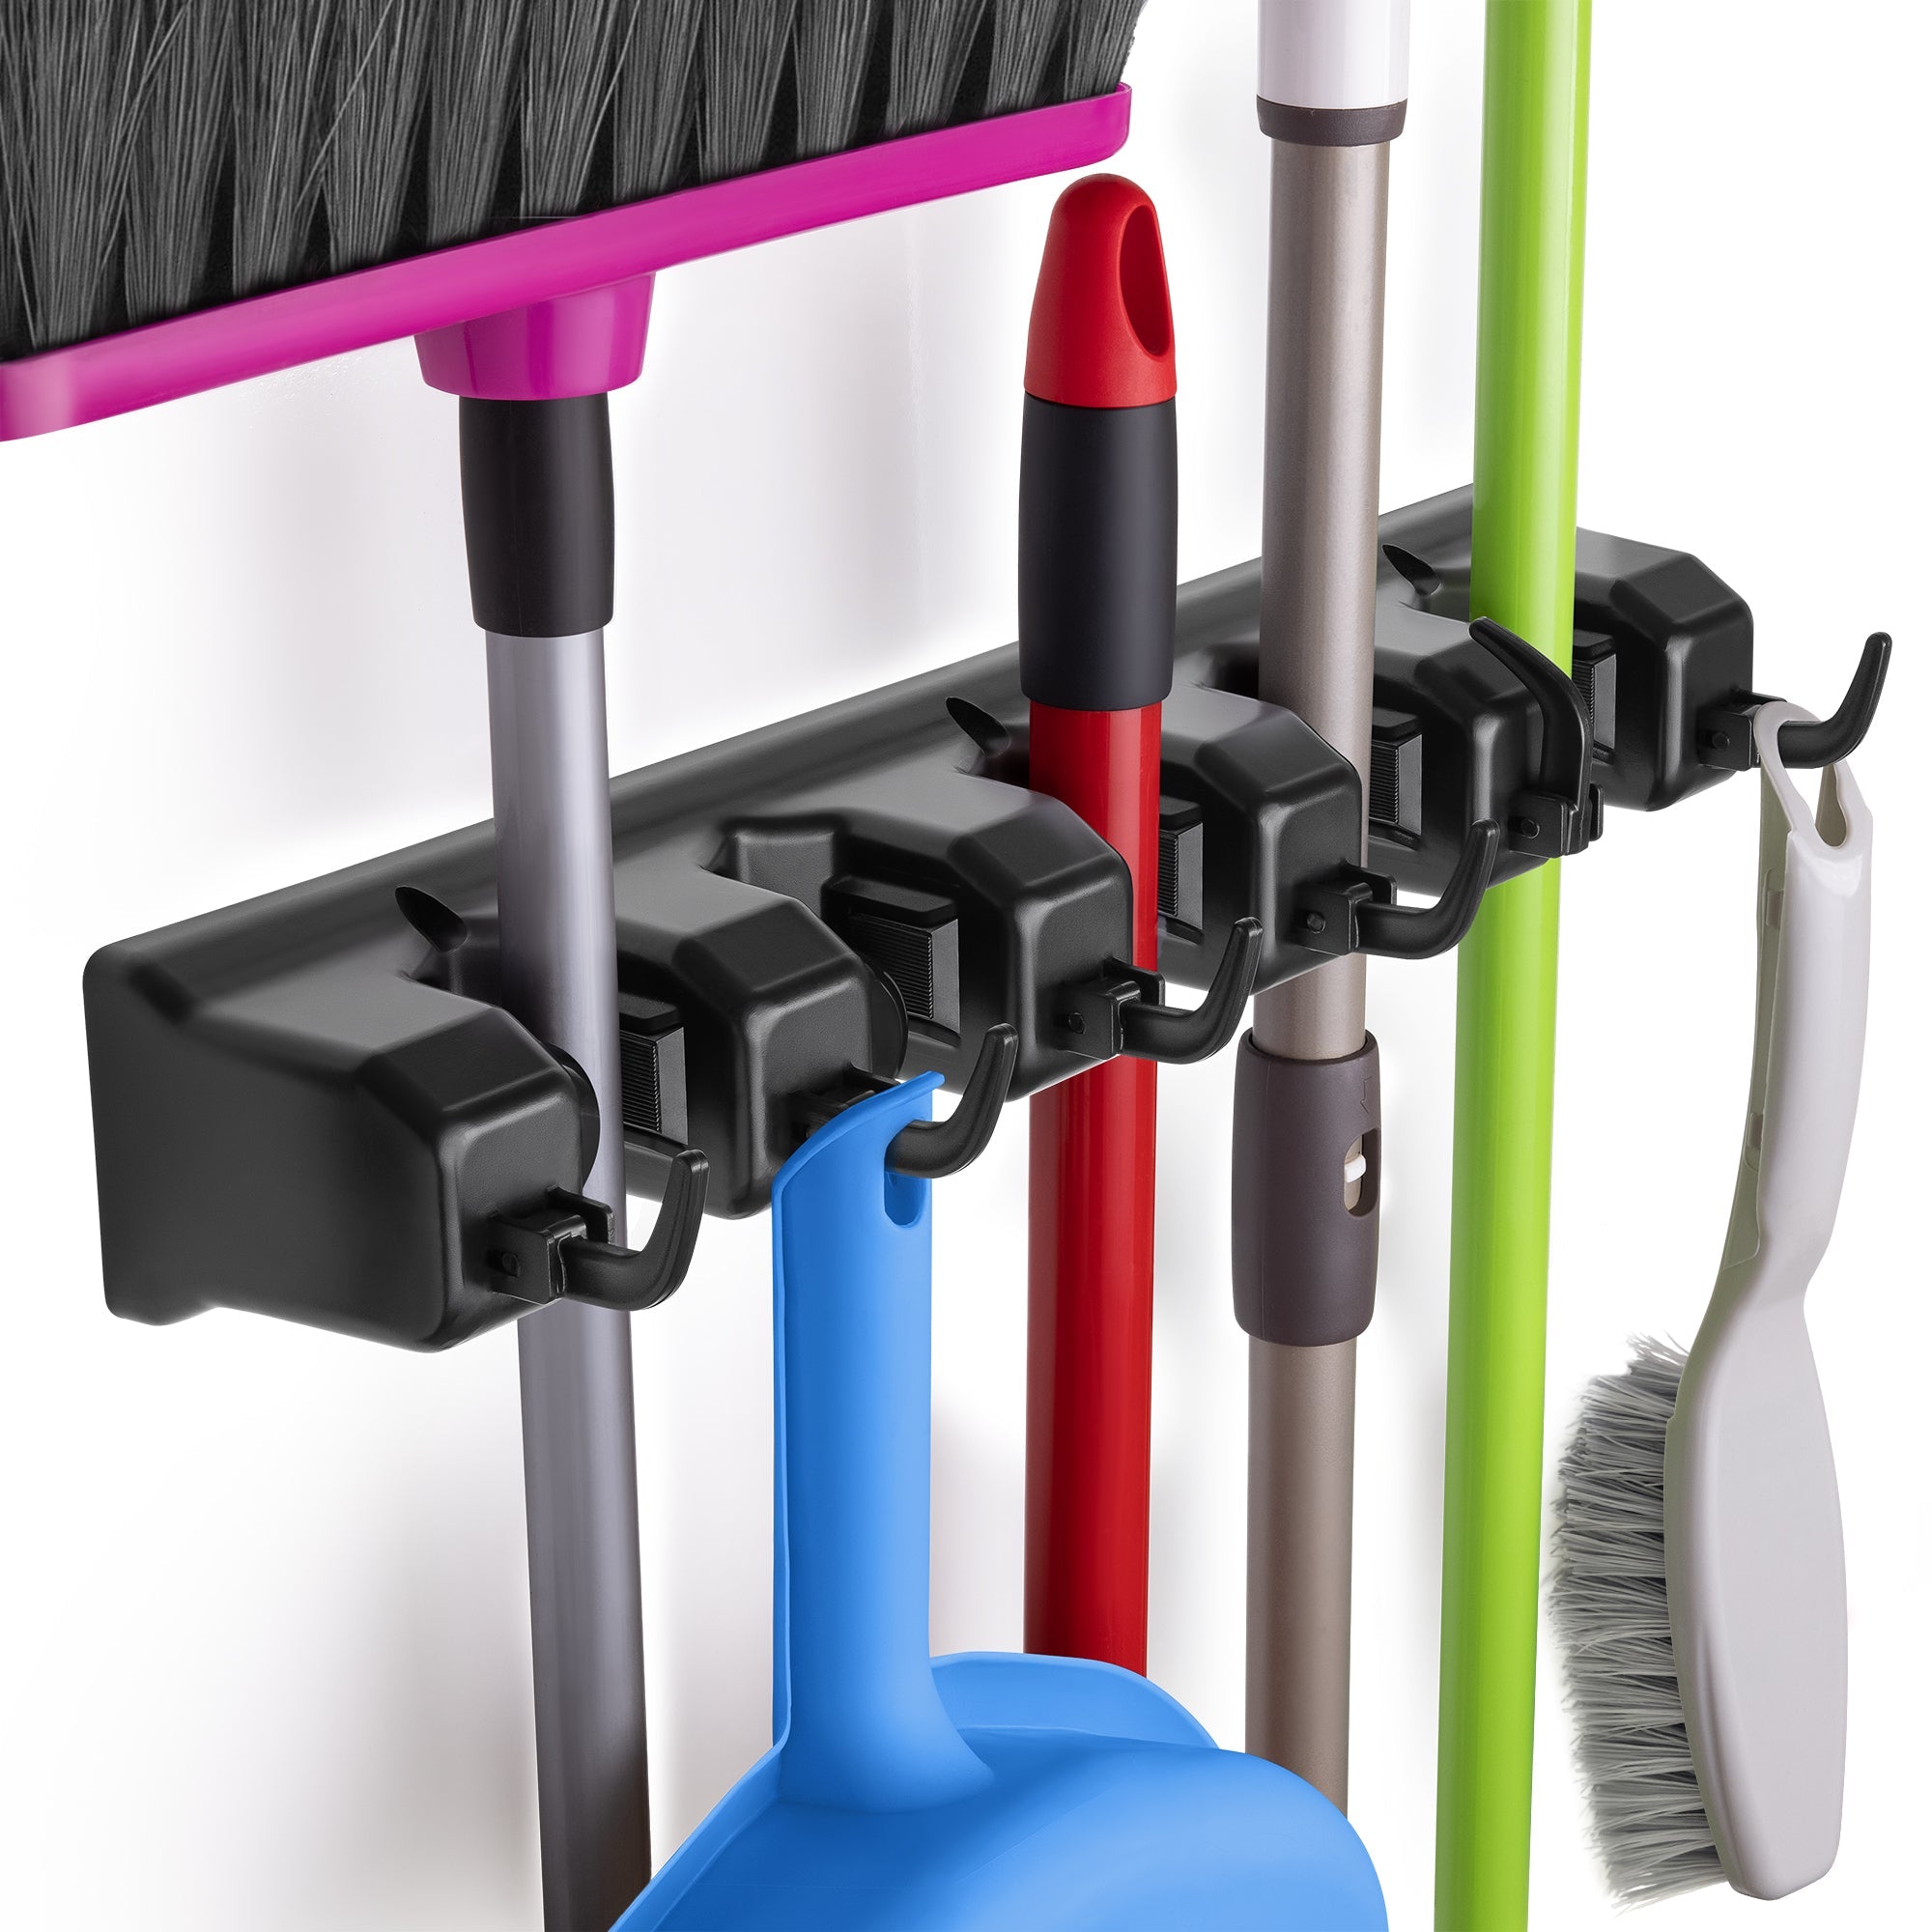 Dropship Mop Holder Wall Mount Mop Broom Holder Mop Hanger Organizer  Storage Rack W/ 5-Position to Sell Online at a Lower Price